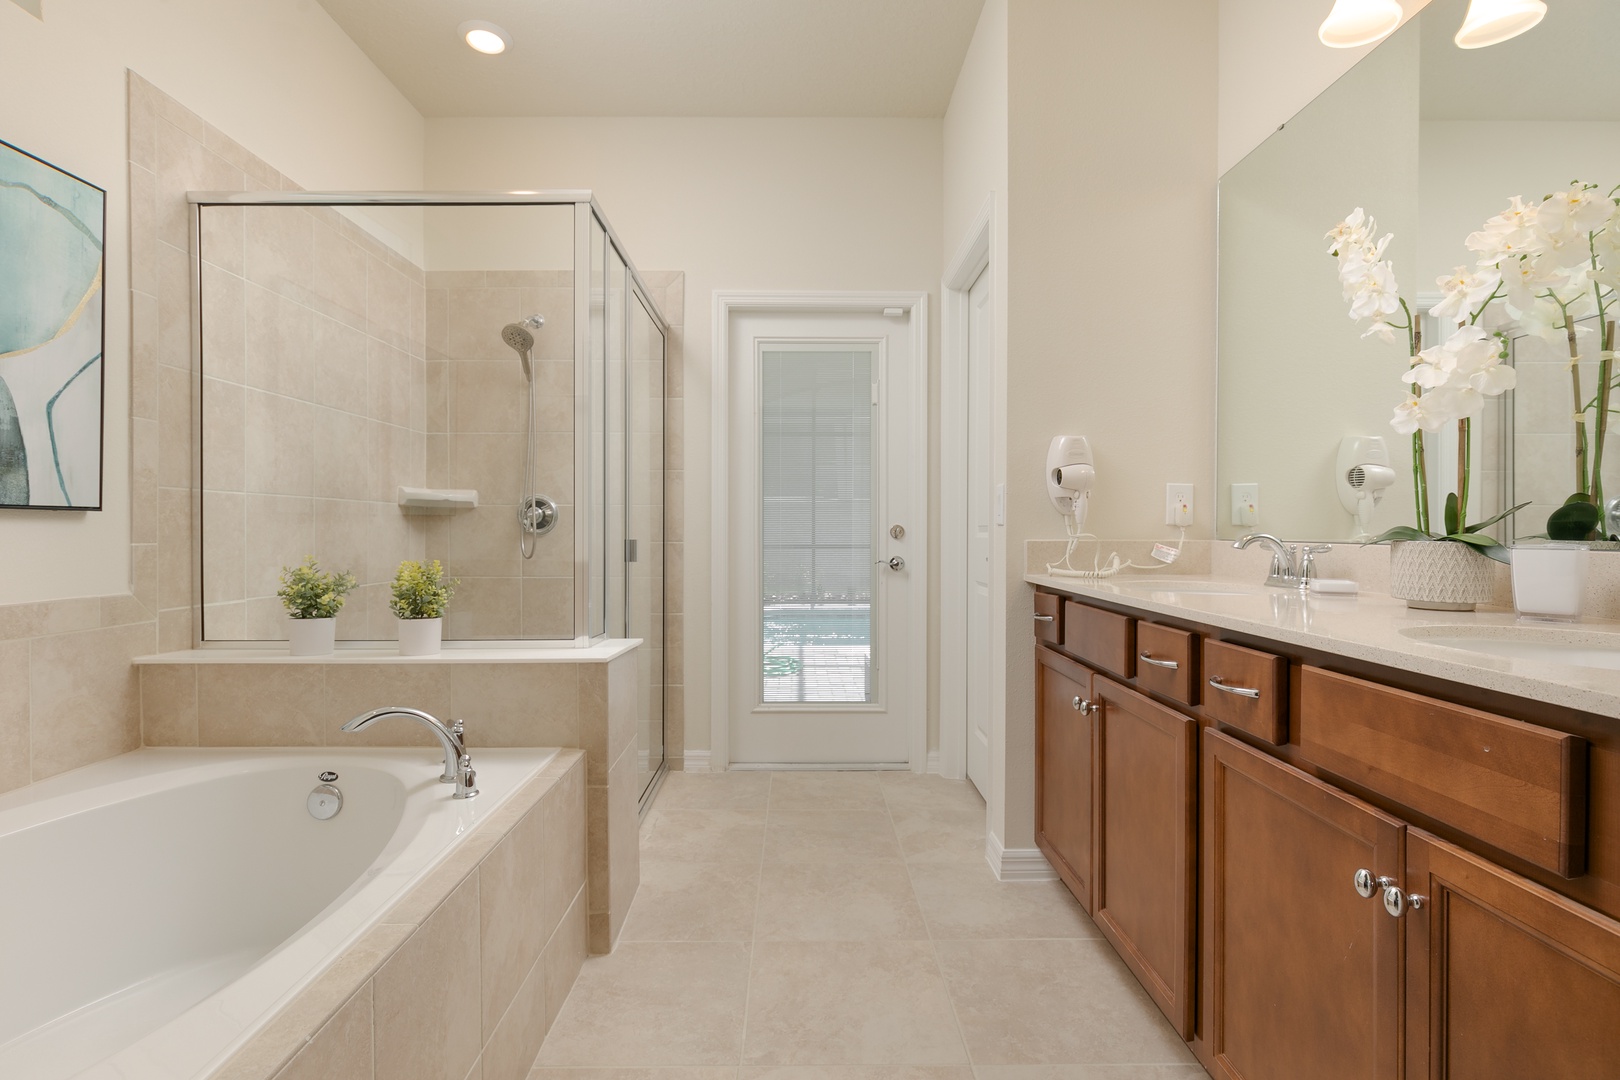 The king en suite offers a dual vanity, glass shower, soaking tub, & patio access